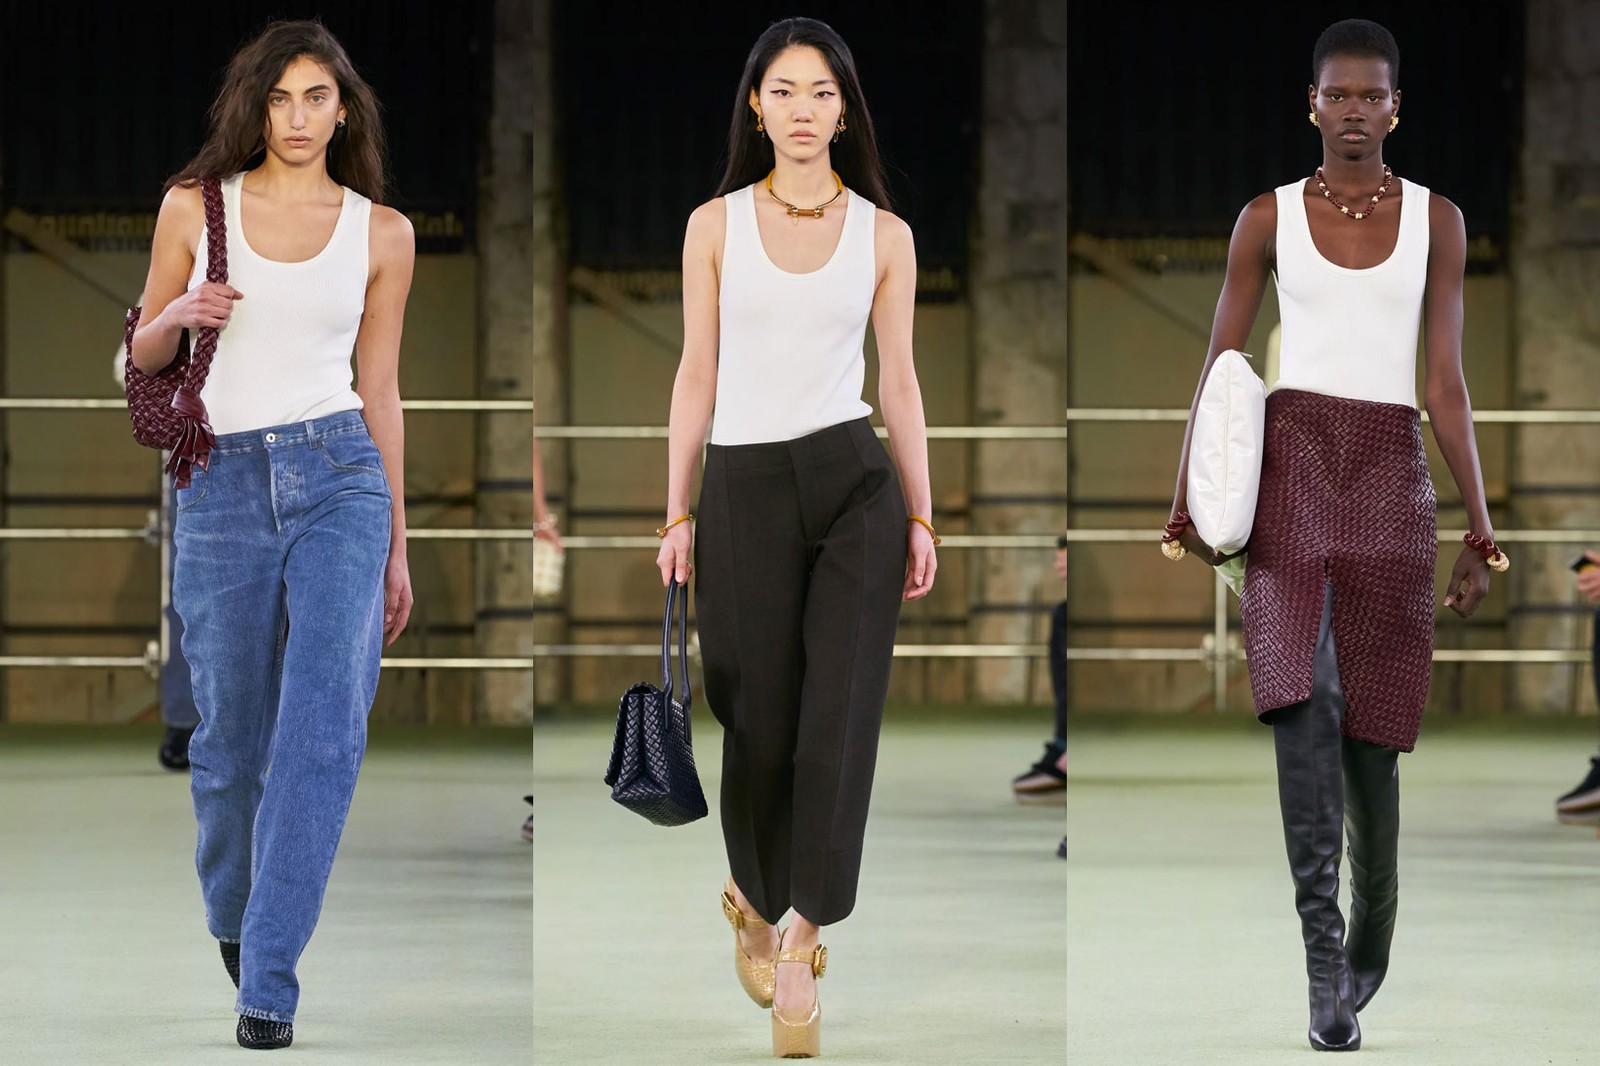 How the White Tank Top Became a Fashion Statement - WSJ